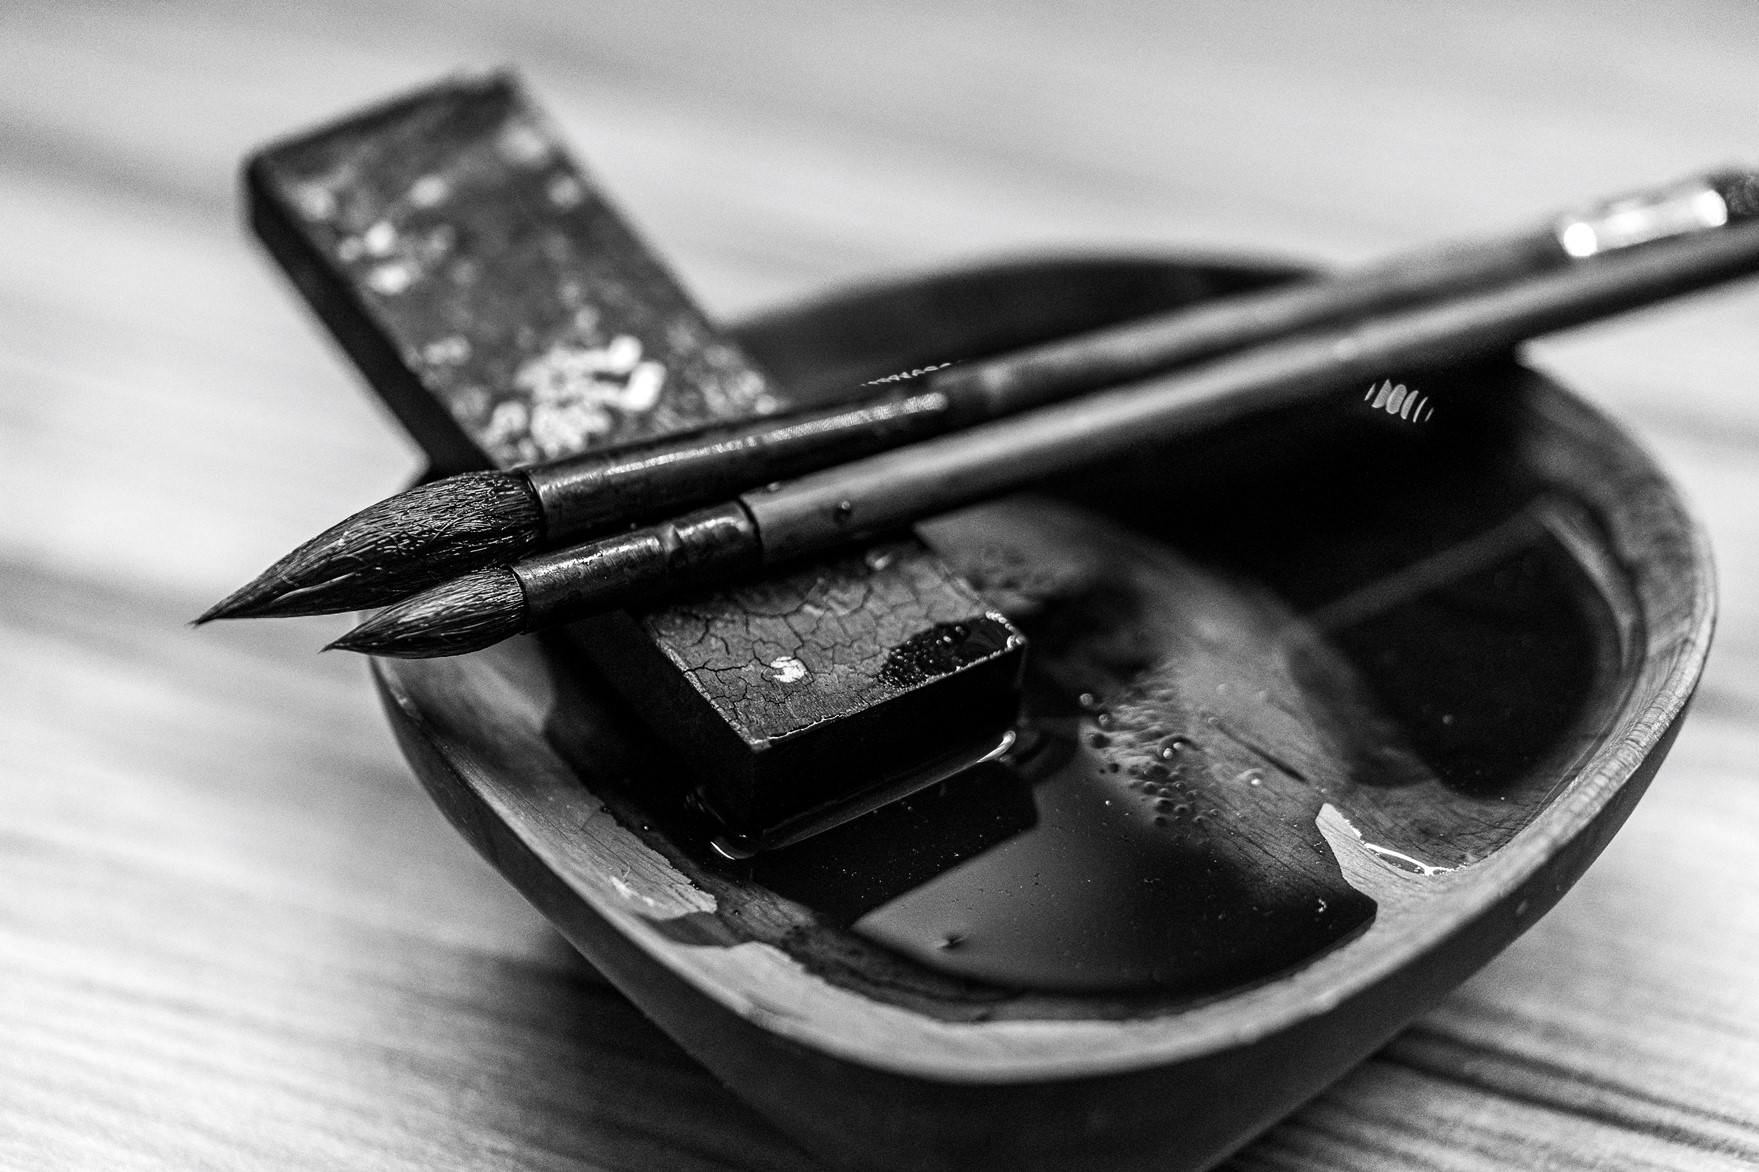 Allan's brushes and ink bowl